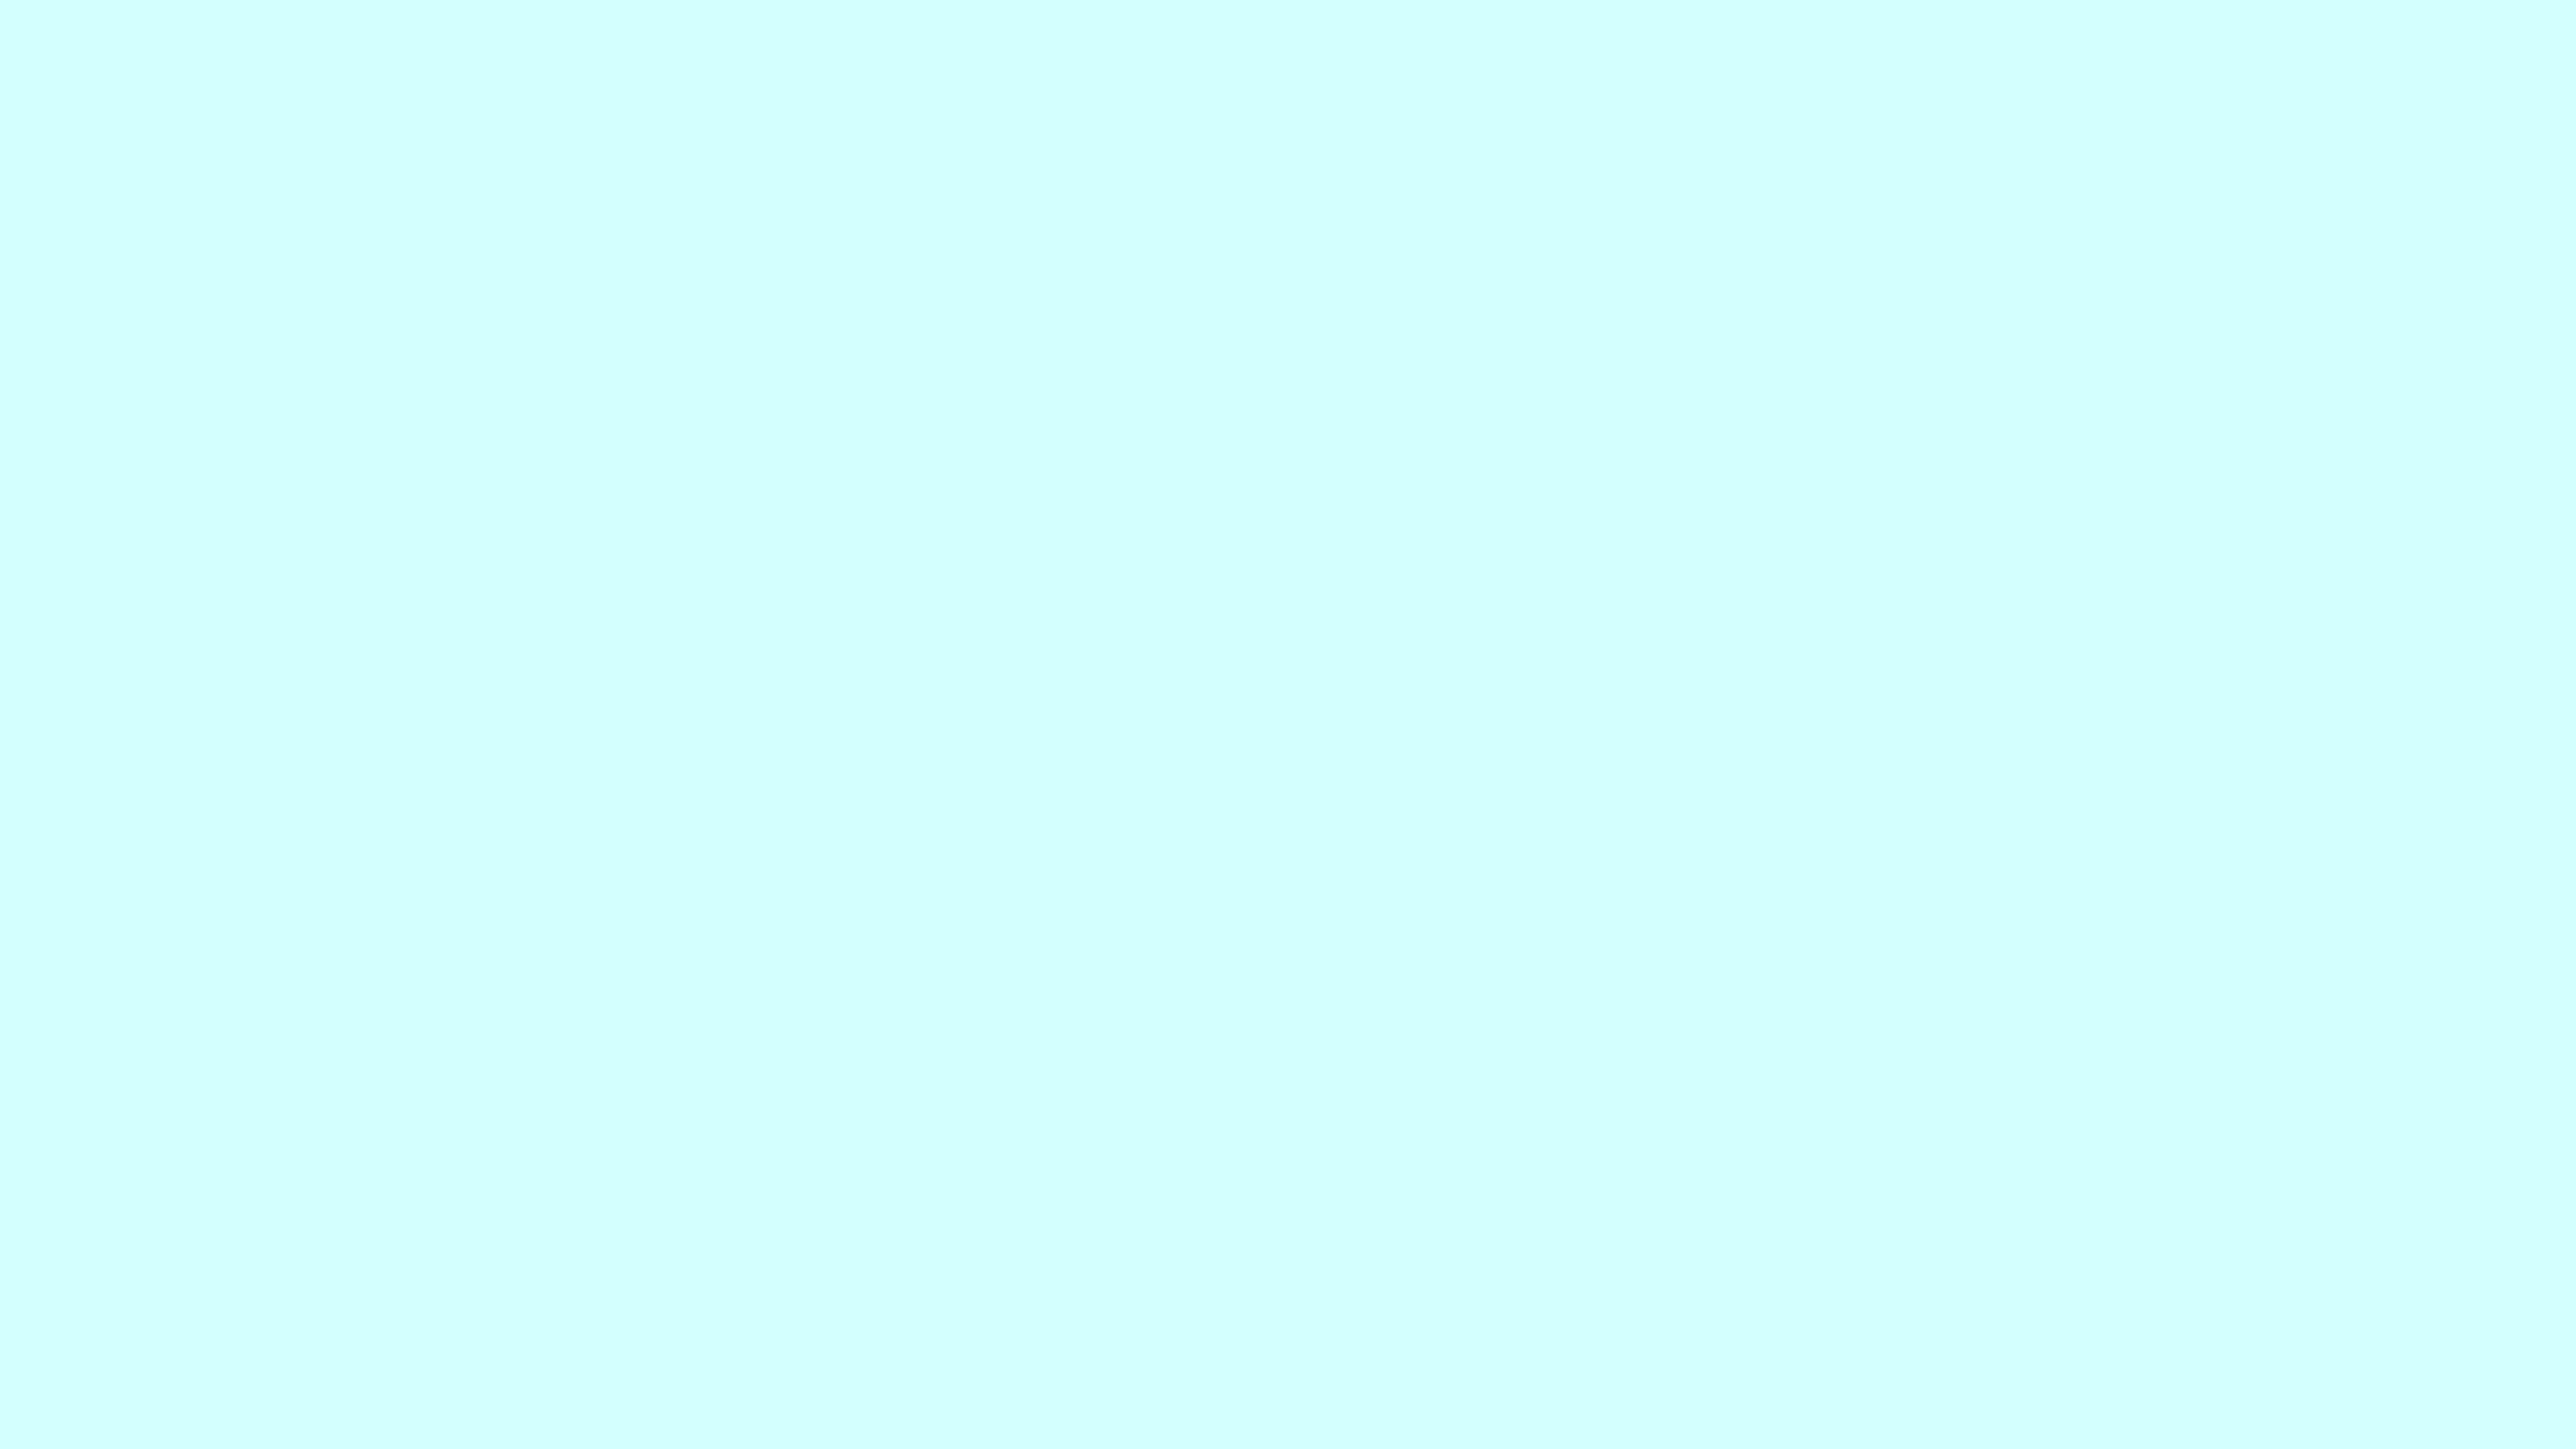 Really Light Blue Solid Color Background Image | Free Image Generator